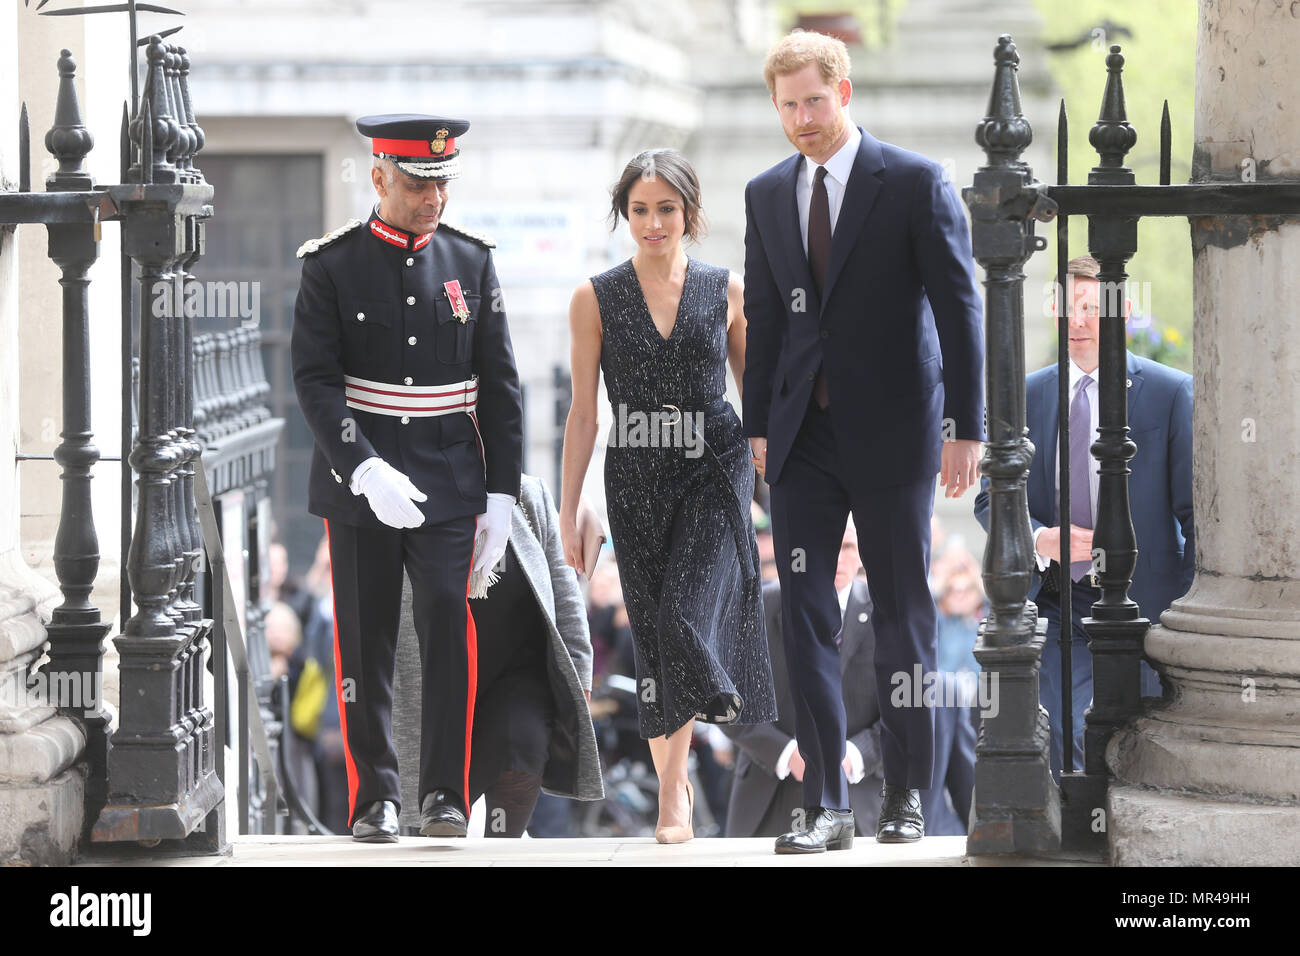 Memorial service to celebrate the life and legacy of Stephen Lawrence, at St Martin-in-the-Fields, Trafalgar Square, London.  Featuring: Prince Harry, Meghan Markle, Kenneth Olisa Where: London, United Kingdom When: 23 Apr 2018 Credit: WENN.com Stock Photo